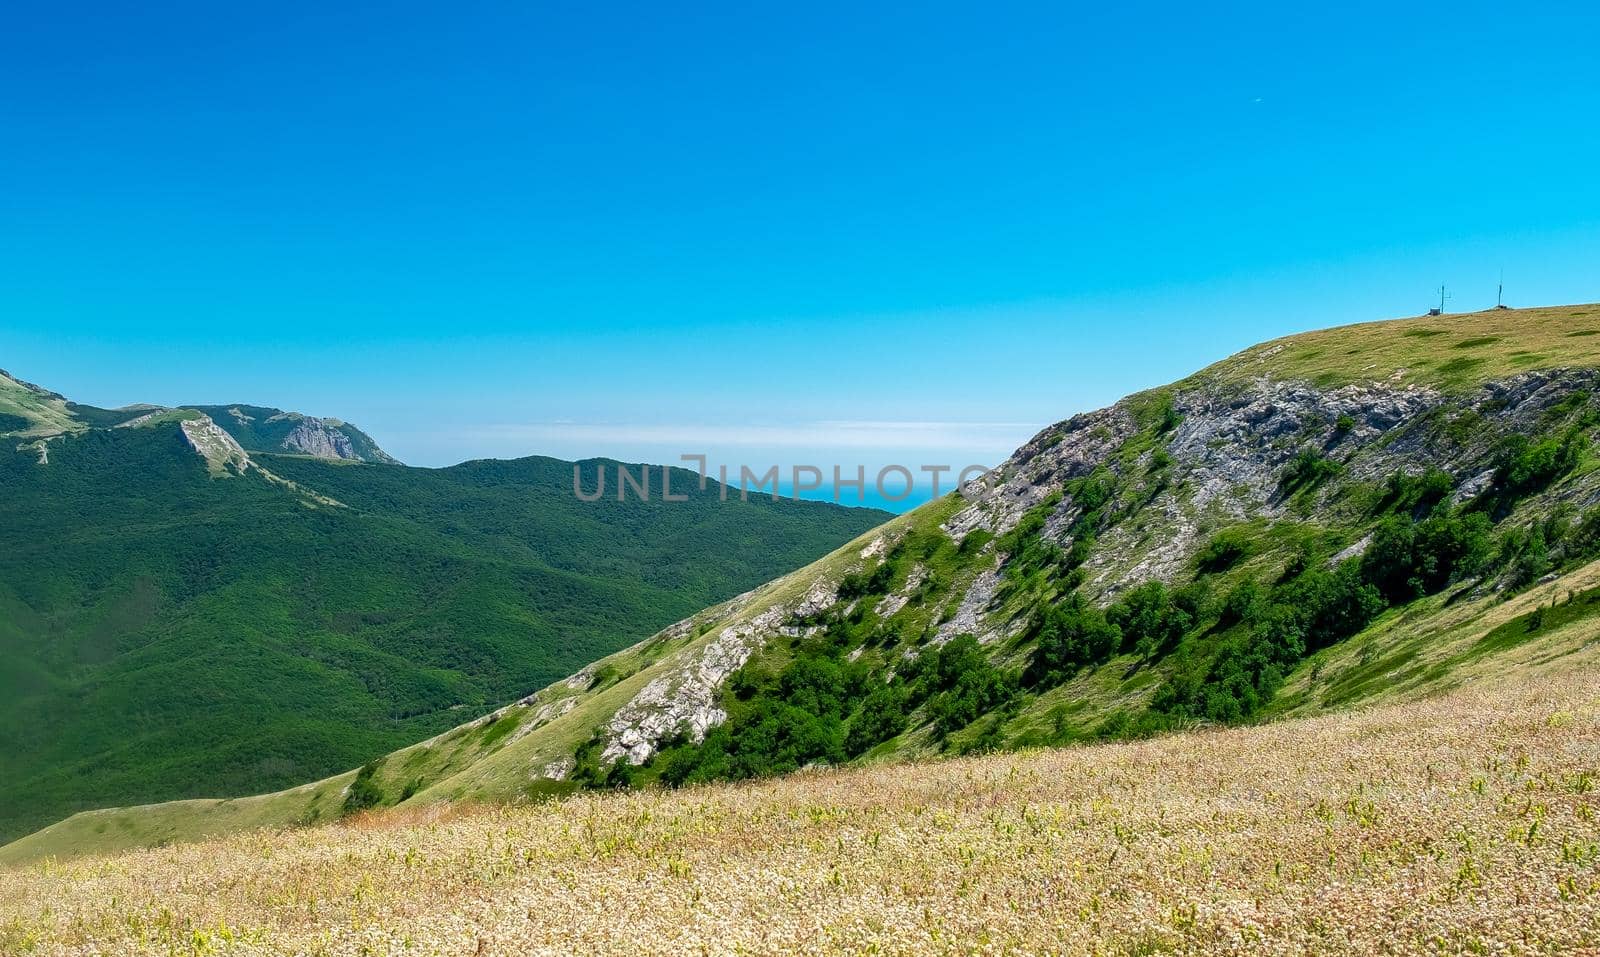 Landscapes of the Crimea peninsula by fifg